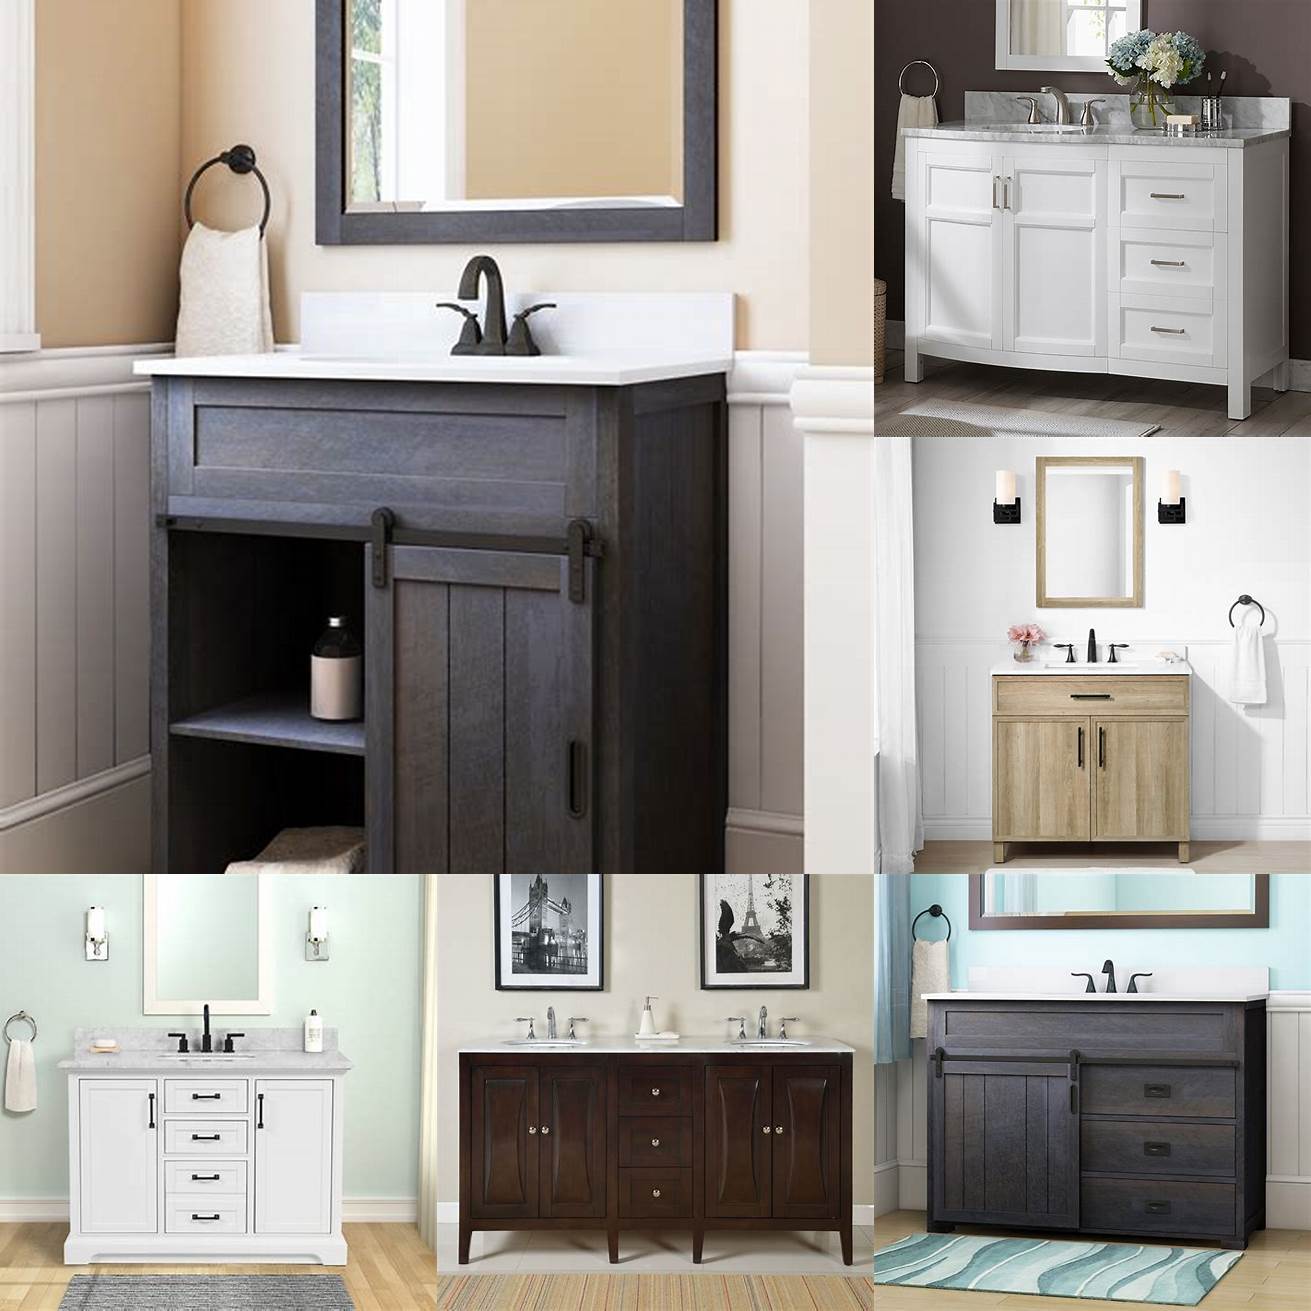 Hardware stores Stores like Home Depot and Lowes carry a wide variety of bathroom vanities in different styles and materials